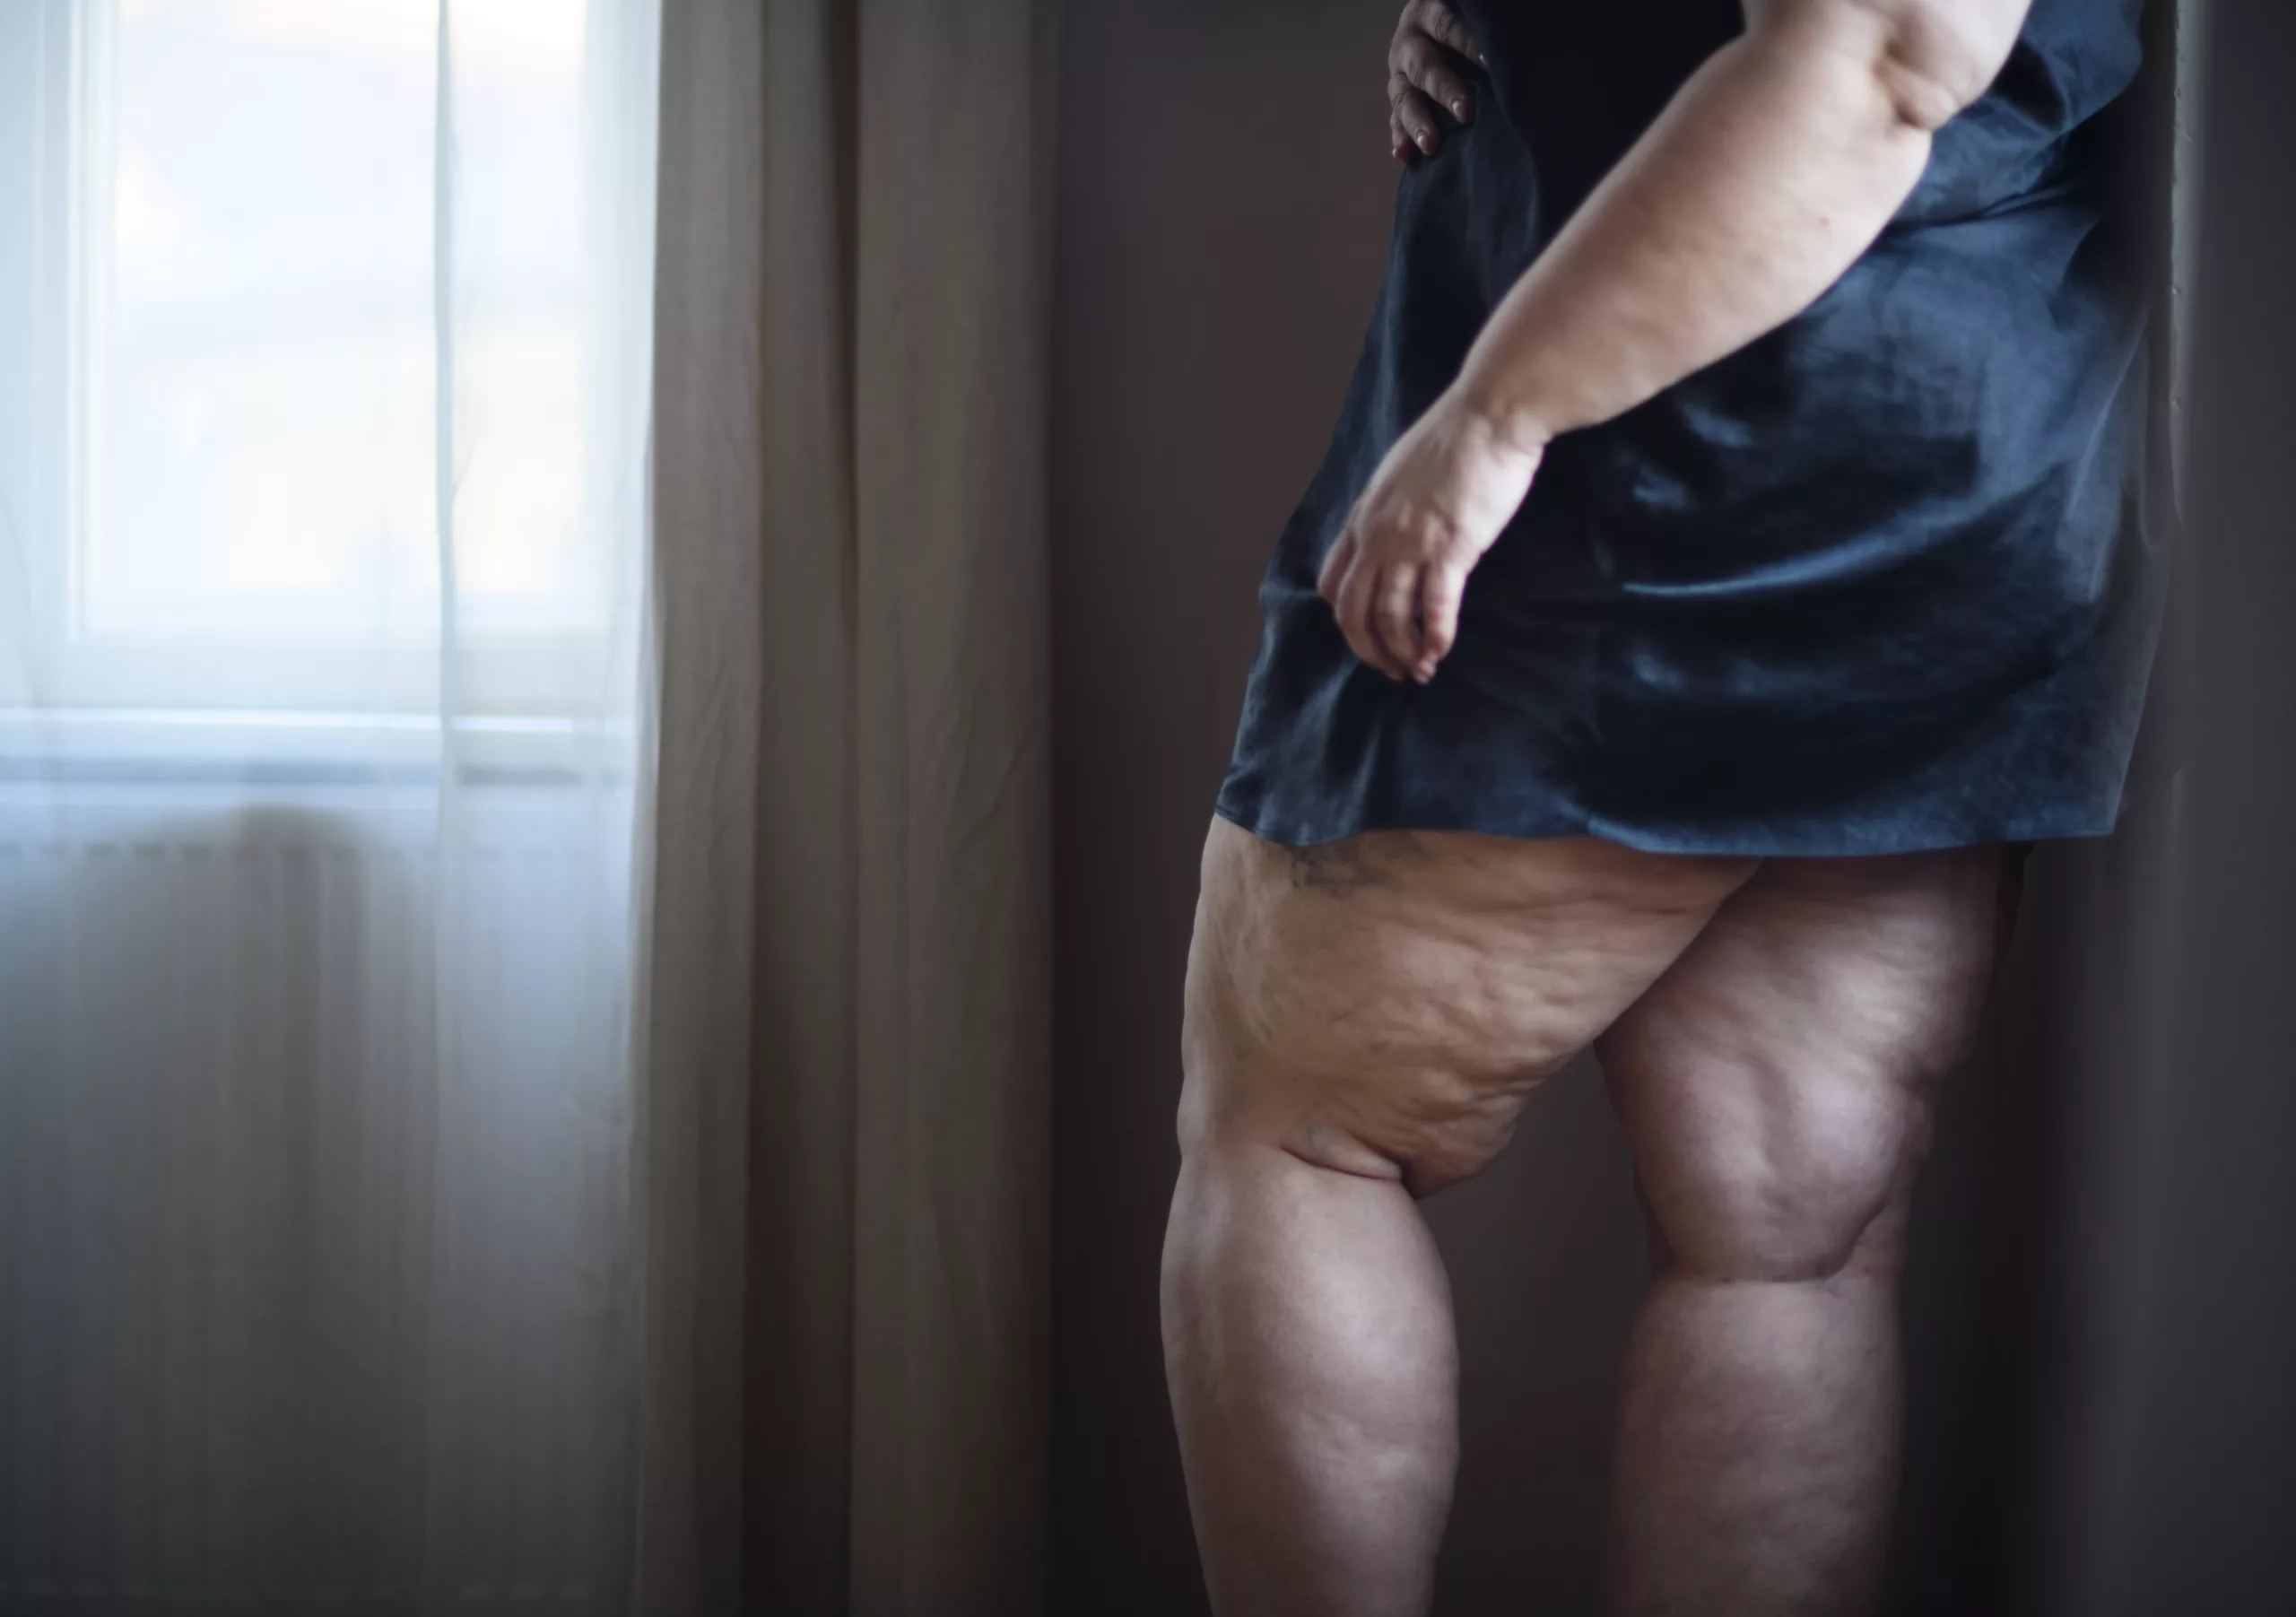 https://plastico.pro/wp-content/uploads/2023/05/fat-woman-with-cellulite-on-her-legs-cut-out-2022-04-12-20-14-20-utc-scaled.webp